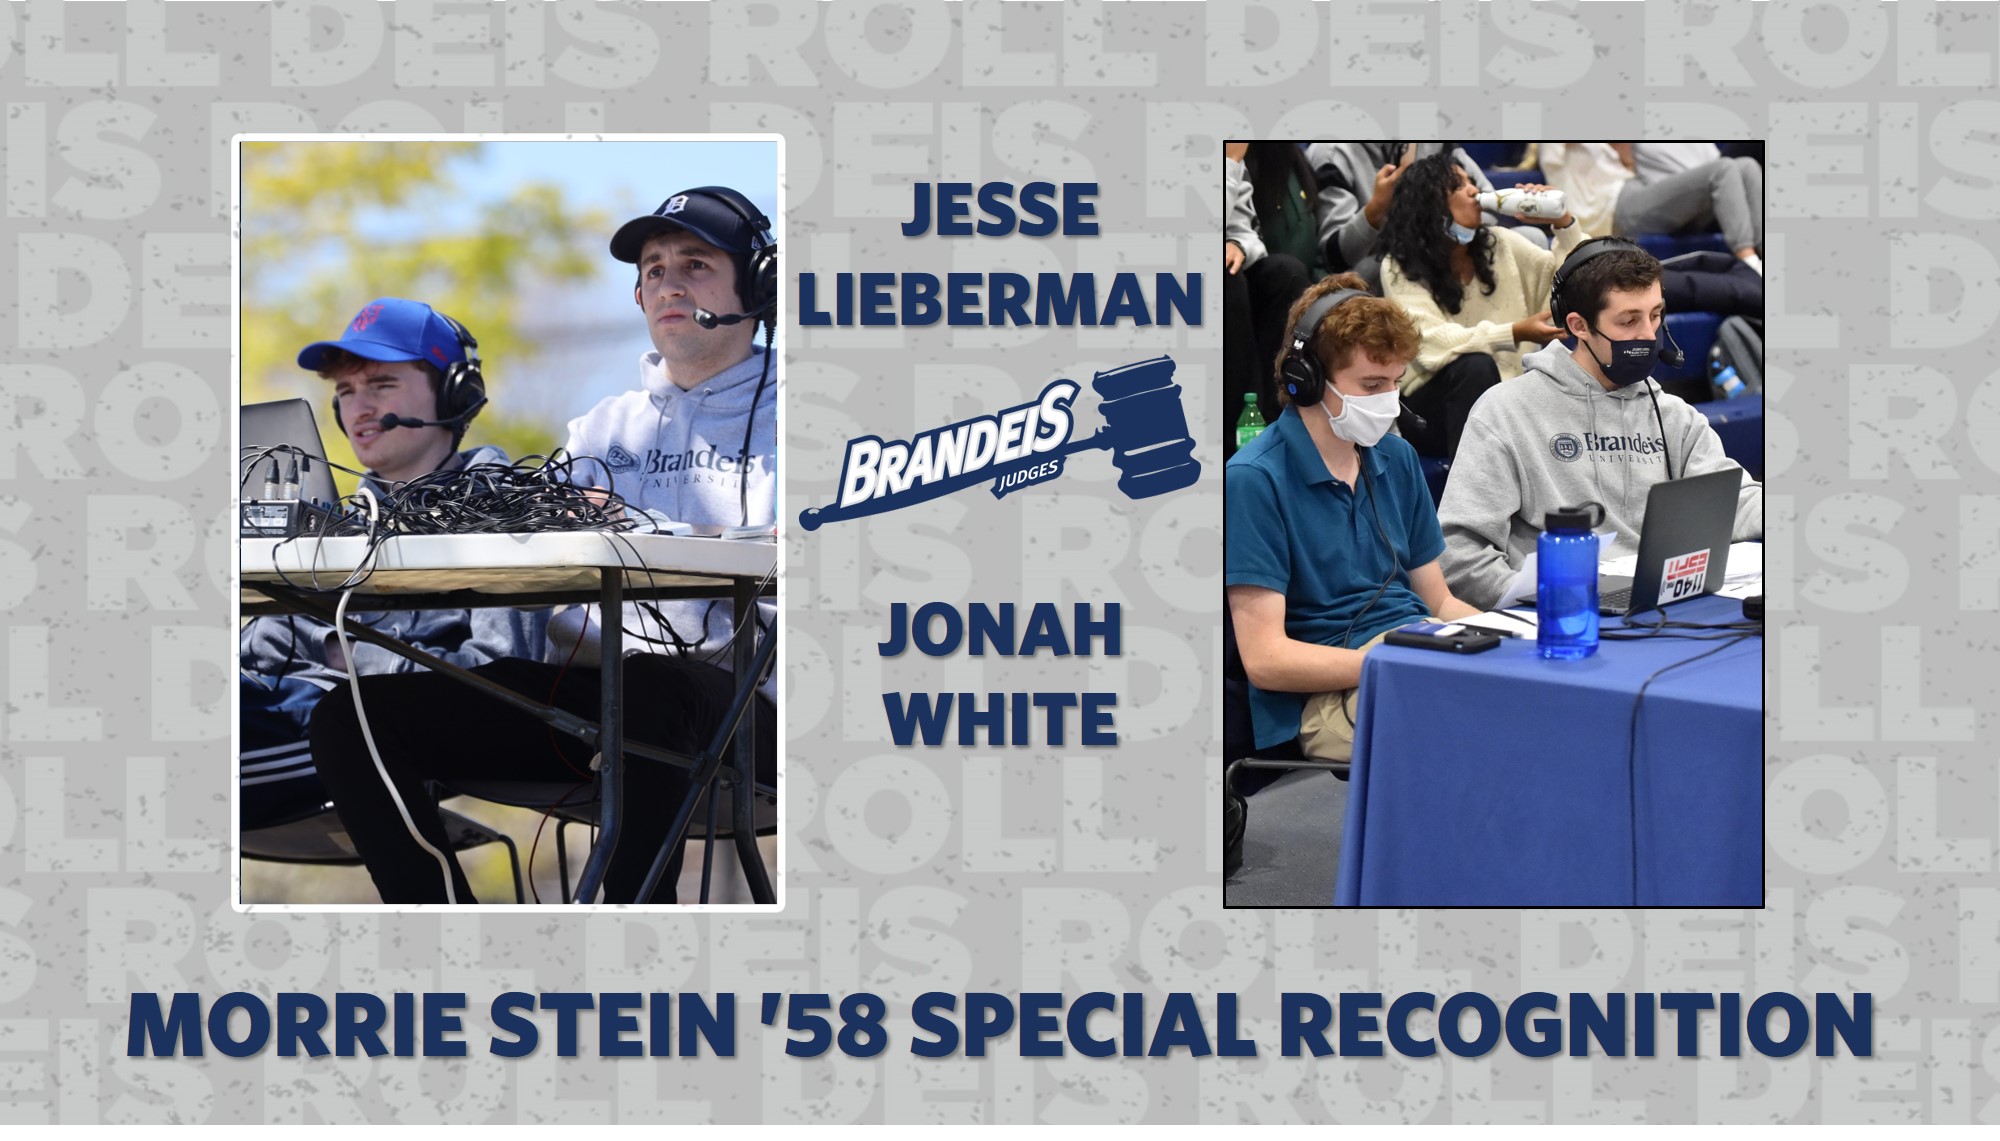 TEXT: Jesse Lieberman, Jonah White, Morrie Stein '58 Special RecognitionIMAGES: Two photos of Jesse LIeberman and Jonah White in their broadcasting gear, one outside and the other indoors